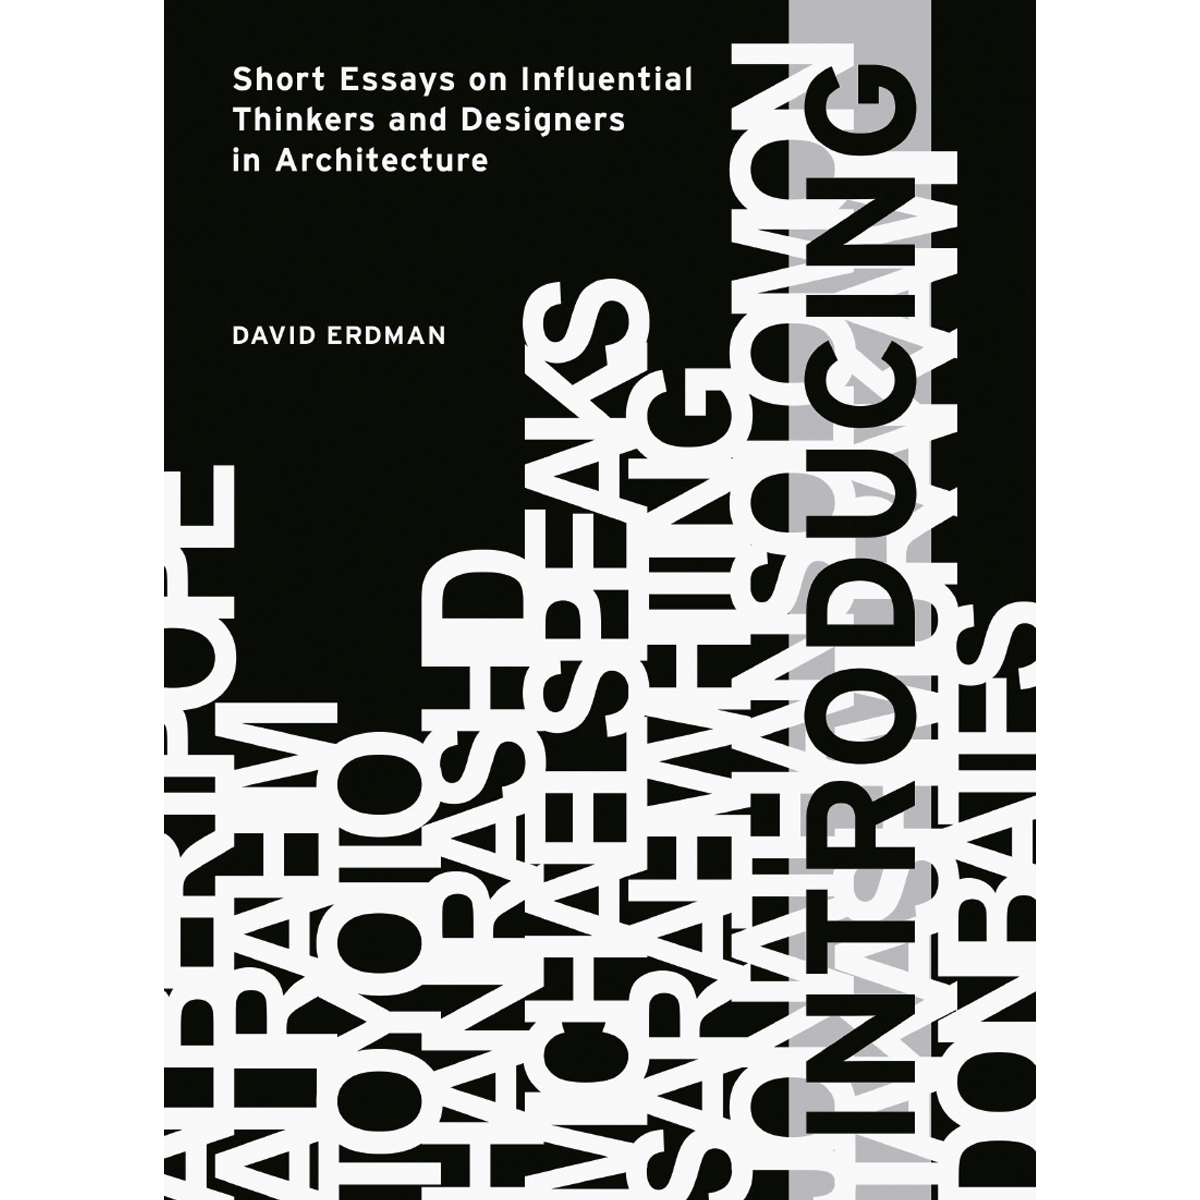 Introducing: Short Essays on Influential Thinkers and Designers in Architecture